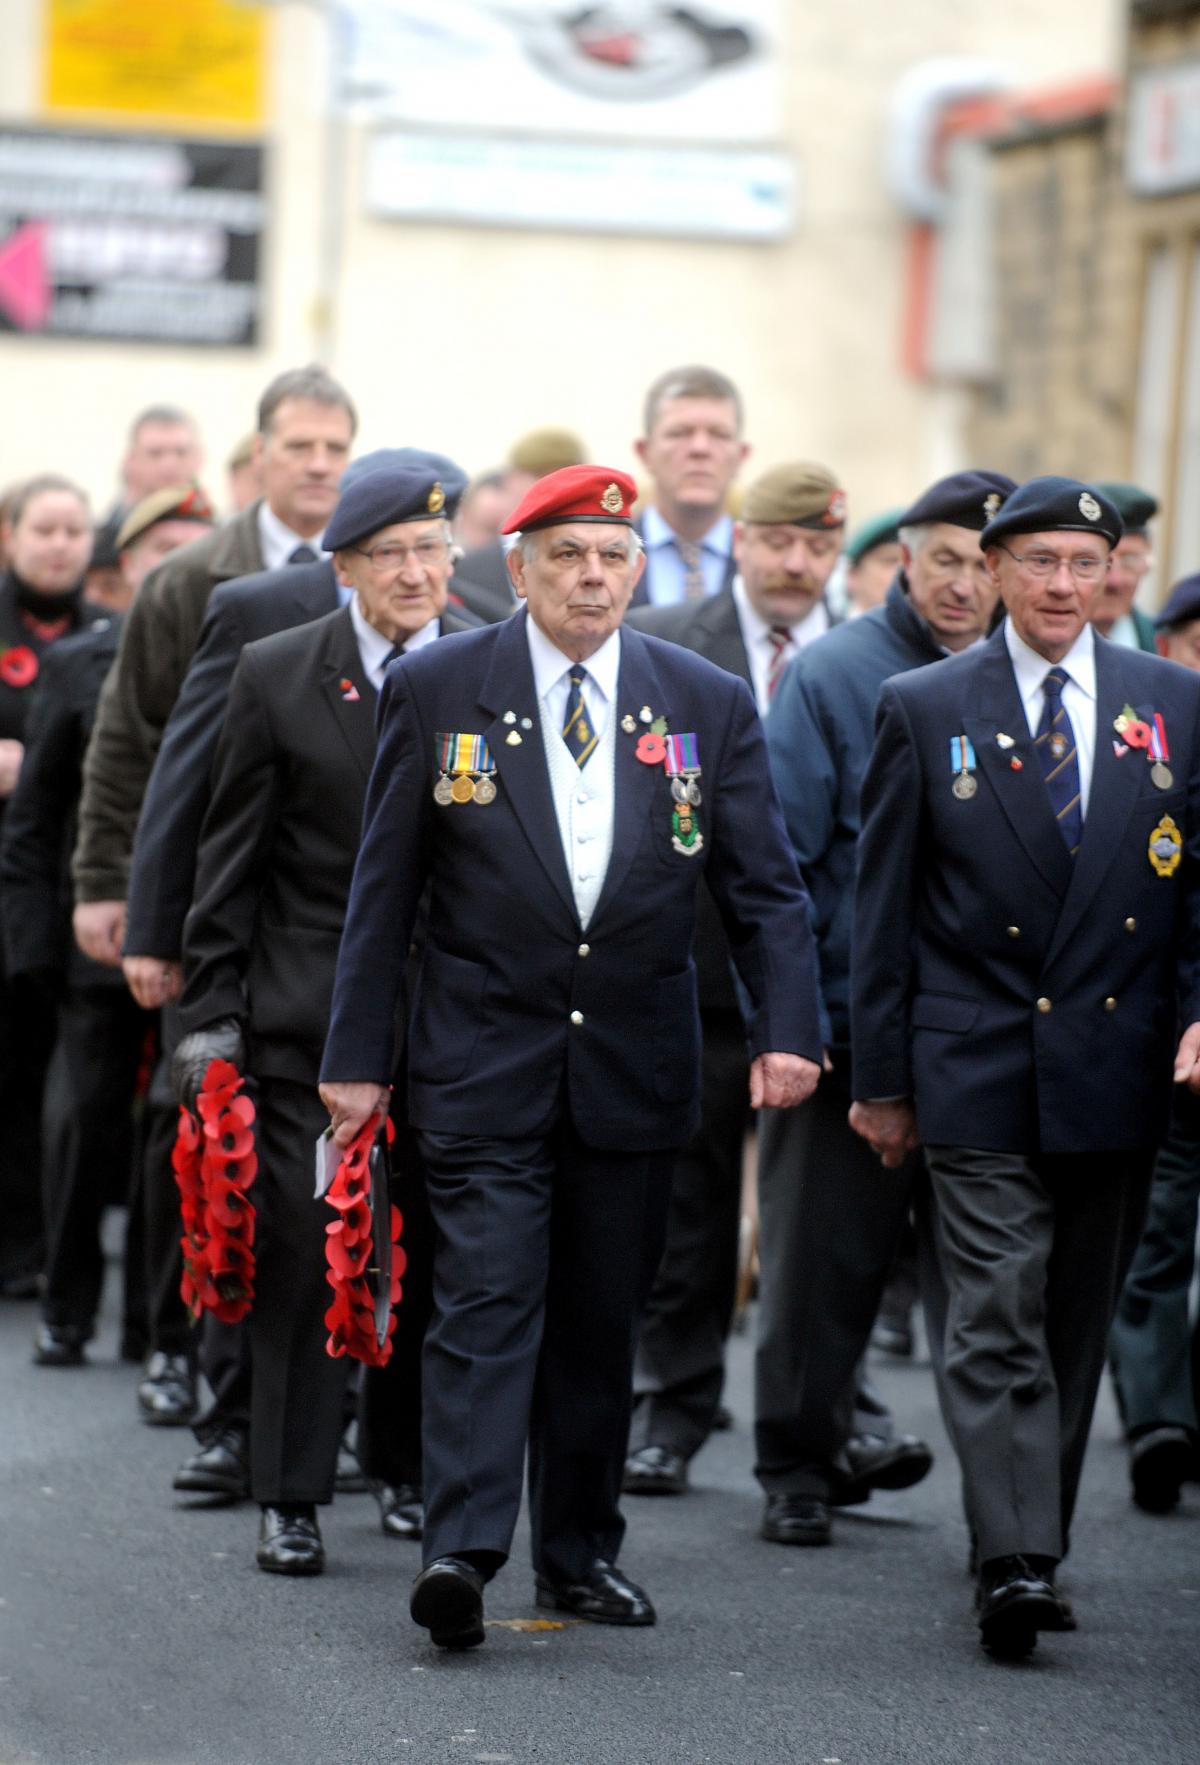 The Remembrance Day parade at Keighley